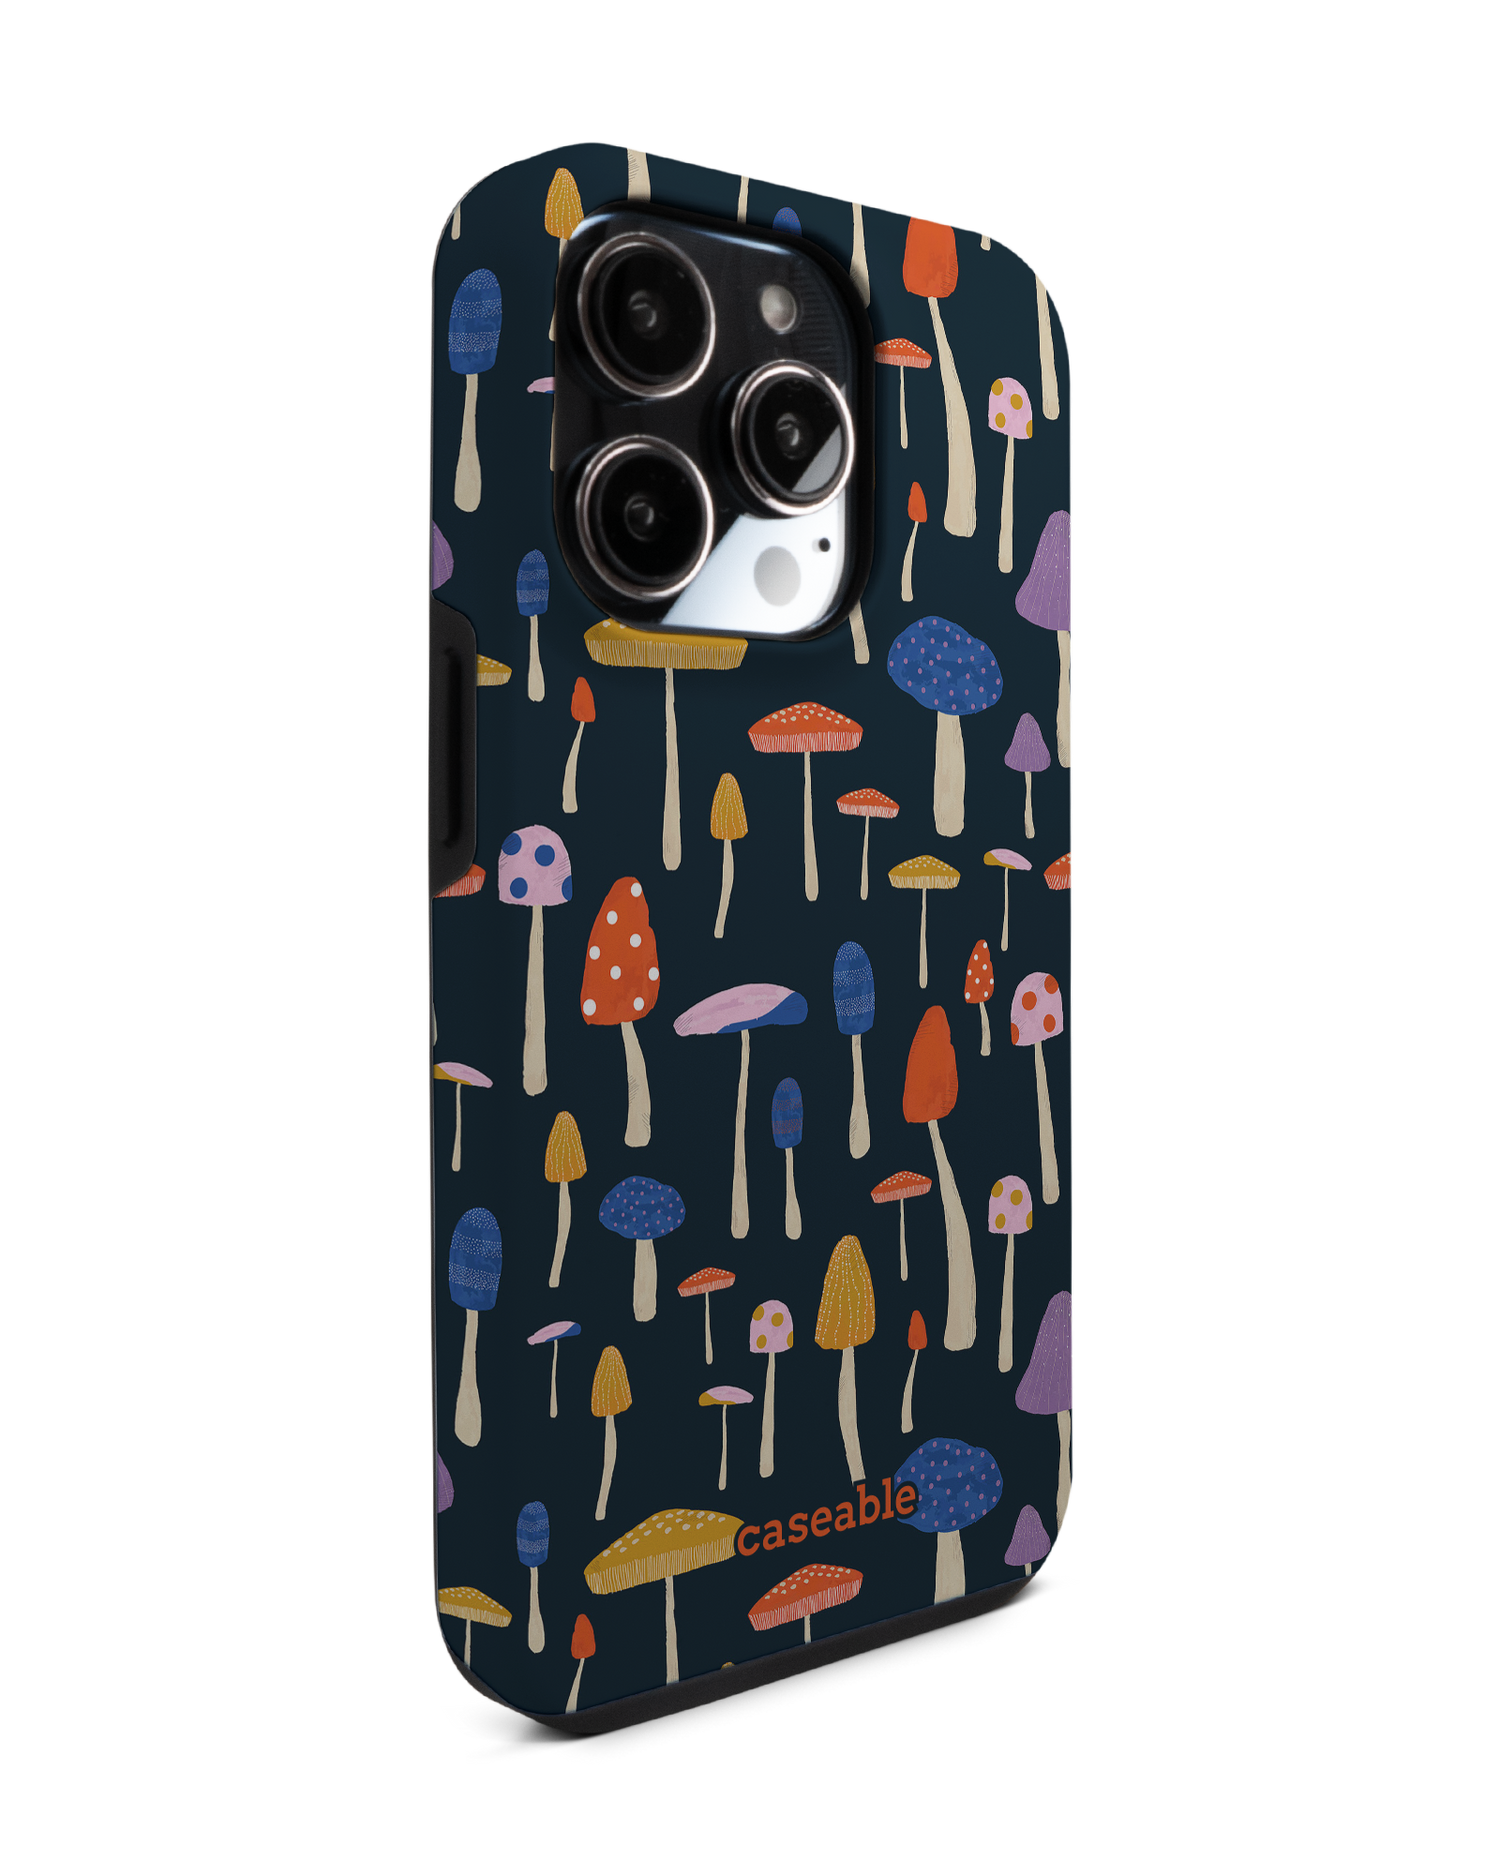 Mushroom Delights Premium Phone Case for Apple iPhone 14 Pro: View from the left side